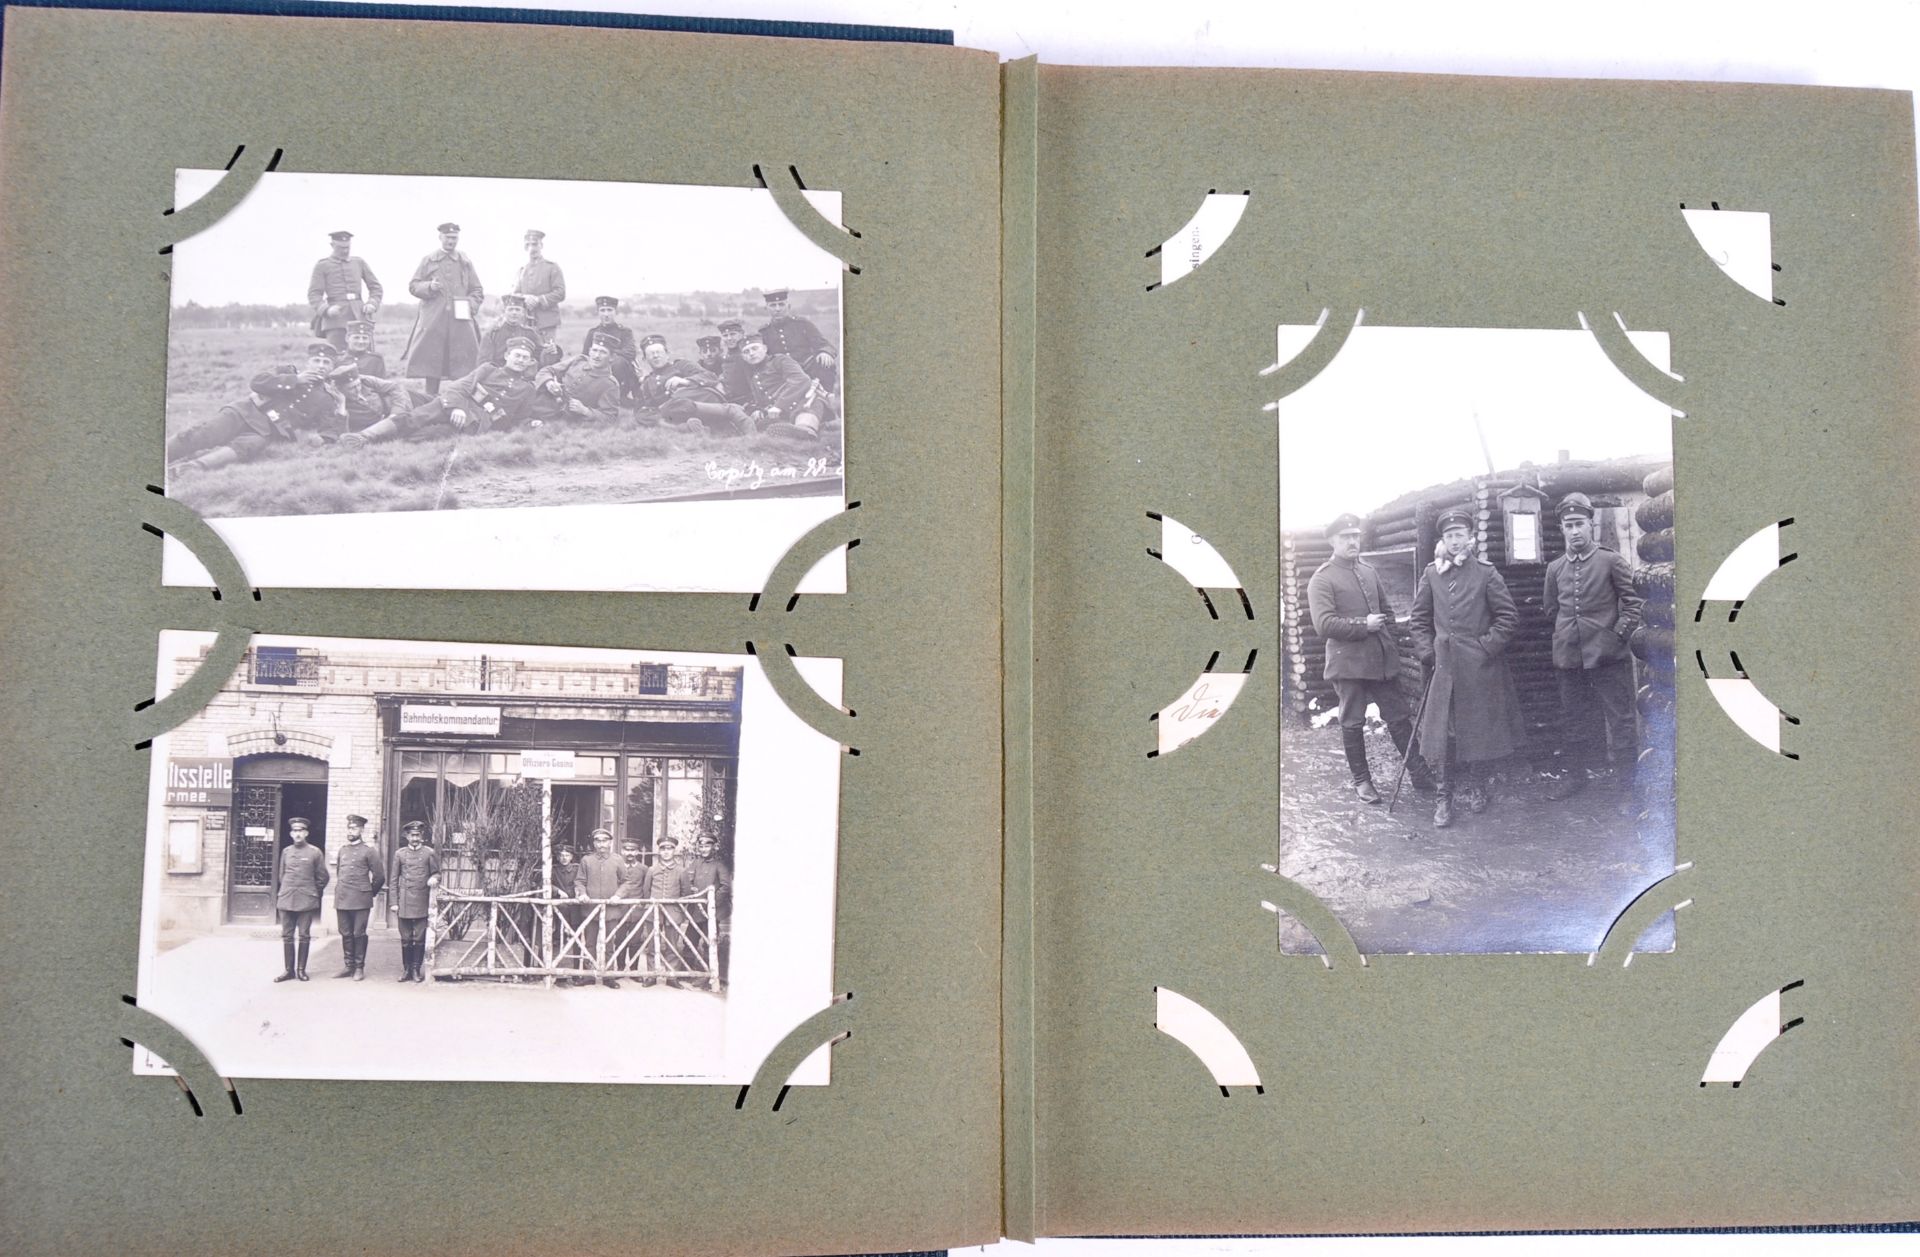 WWI FIRST WORLD WAR REAL PHOTOGRAPH POSTCARD / PHOTO ALBUM - Image 2 of 11